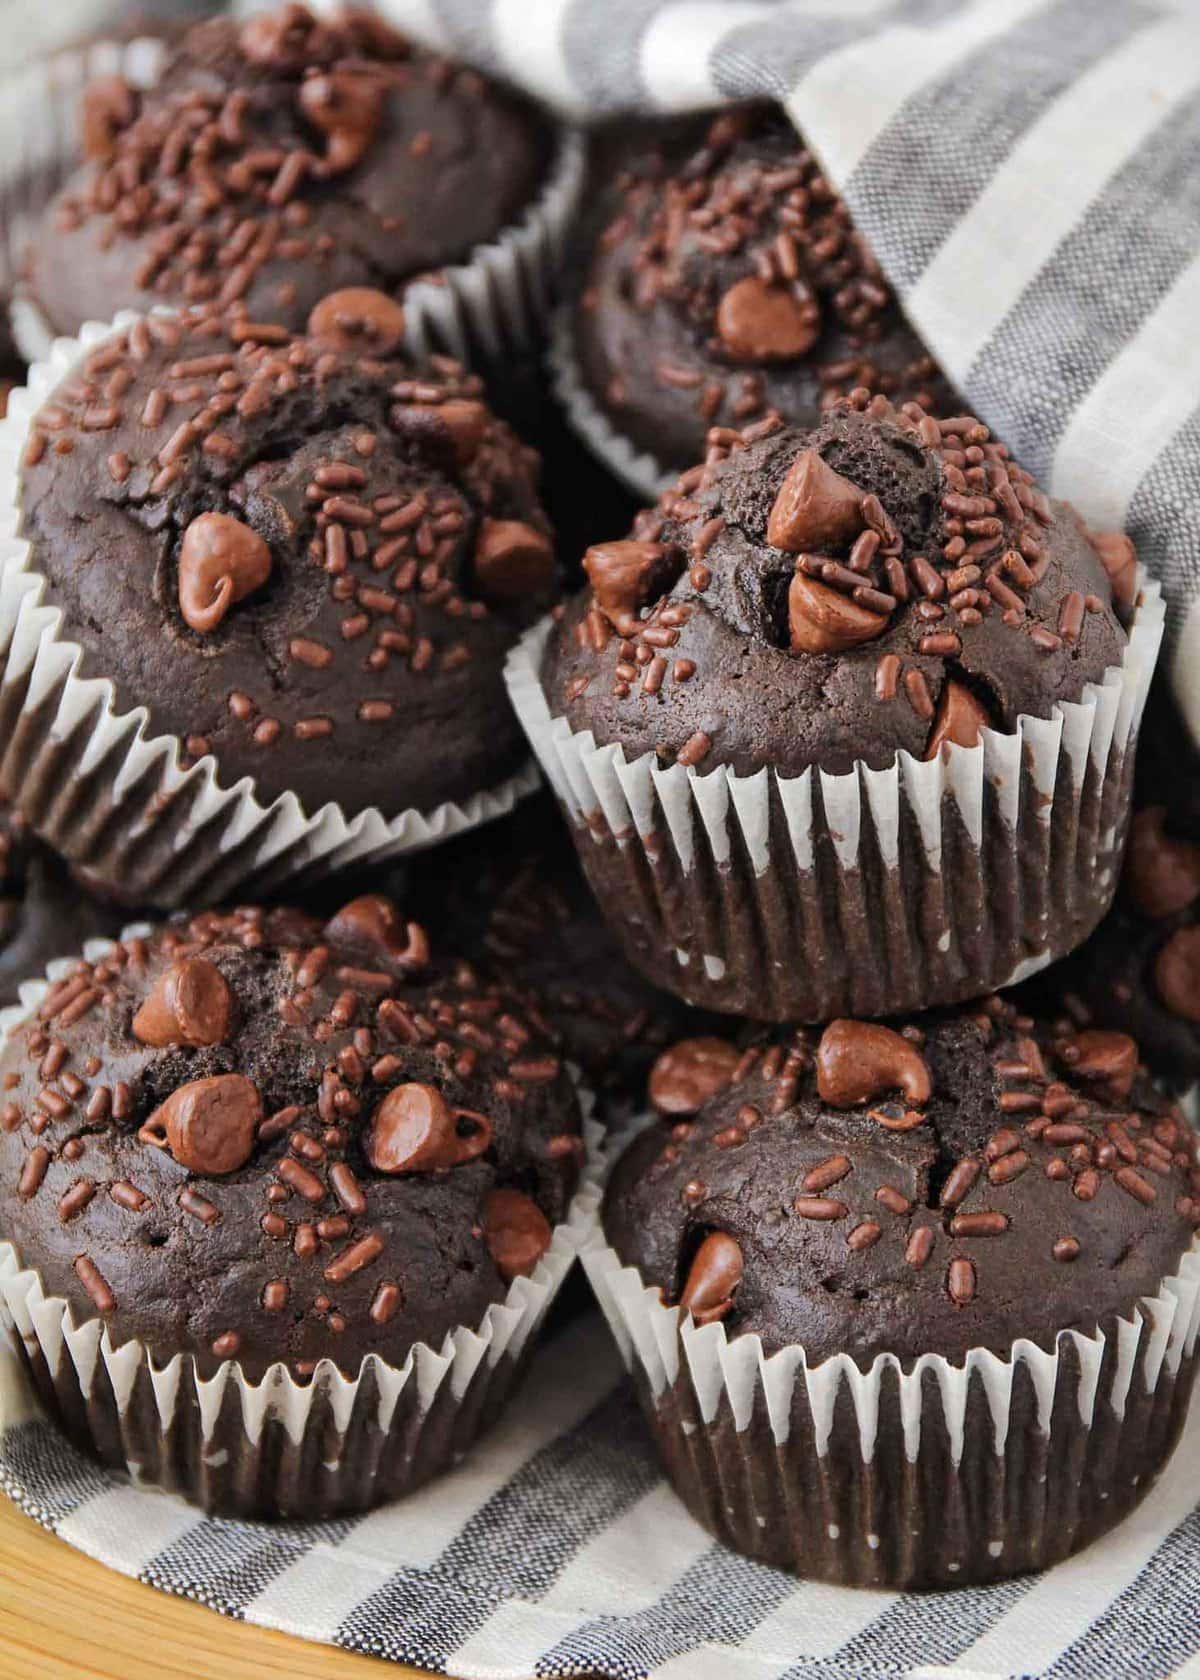 Chocolate muffins piled on a dish towel.